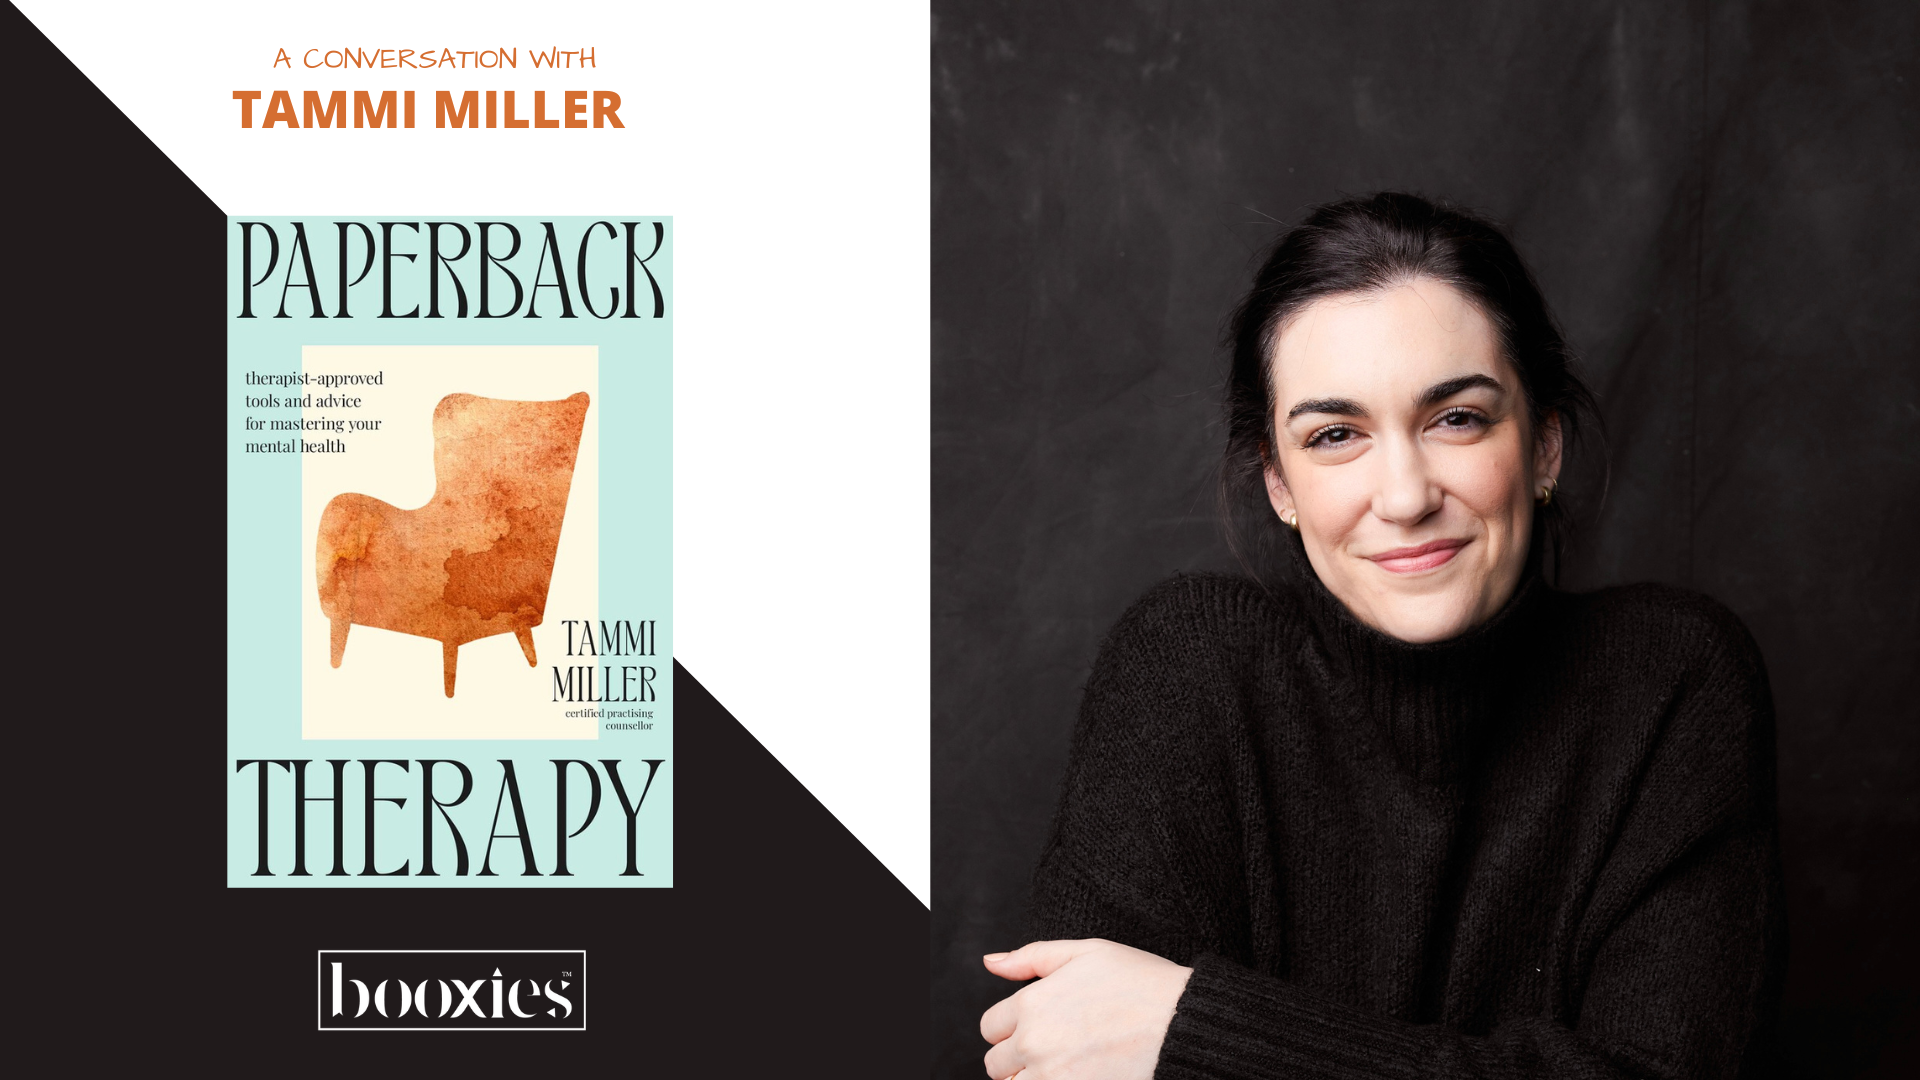 conversation with Tammi Miller, author of Paperback therapy